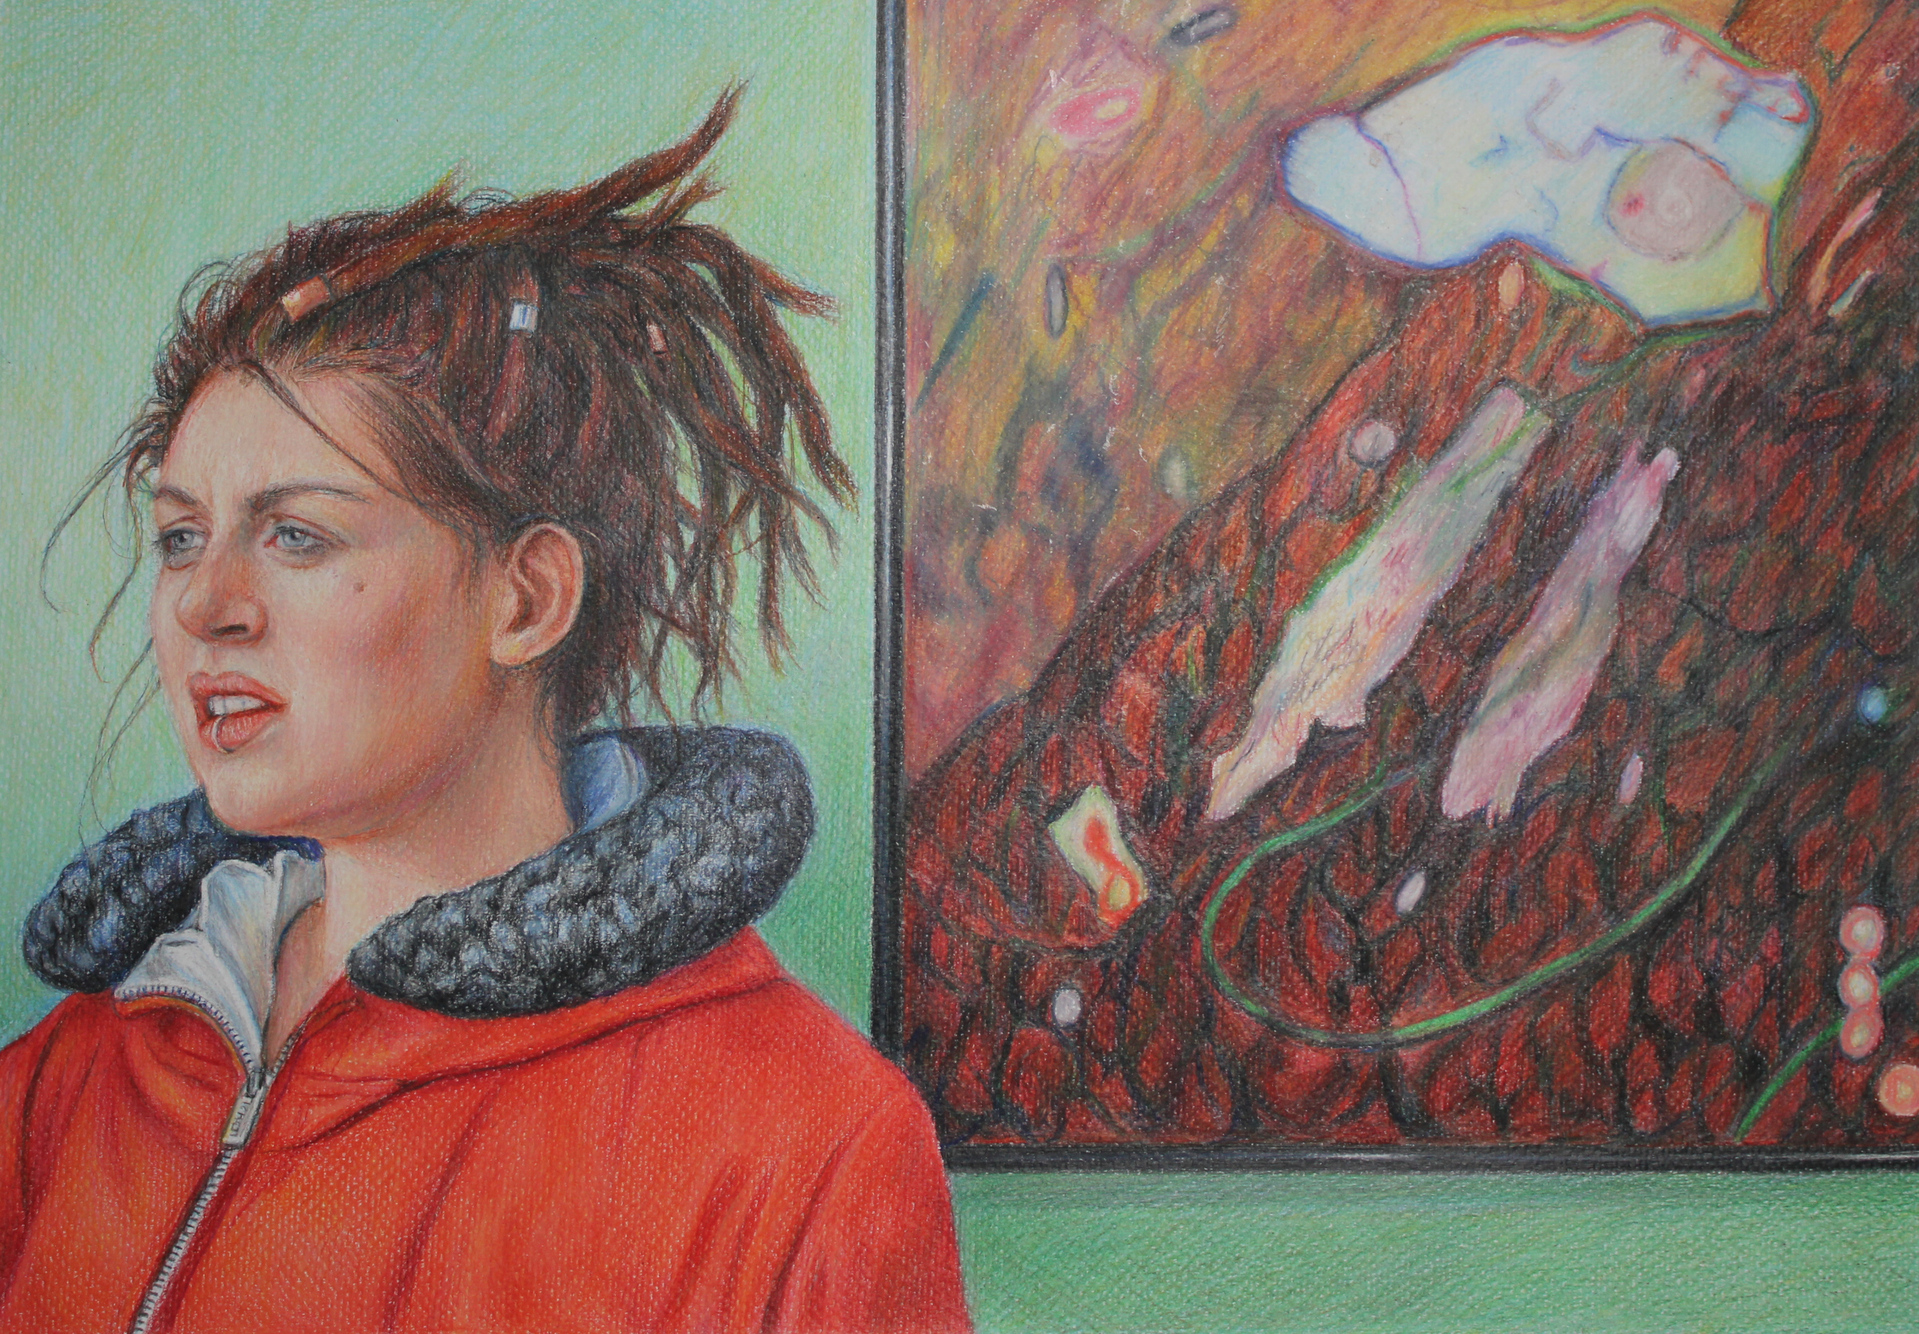 Artists Reception and Demo at ARTfactory - To the Point Colored Pencil  Society